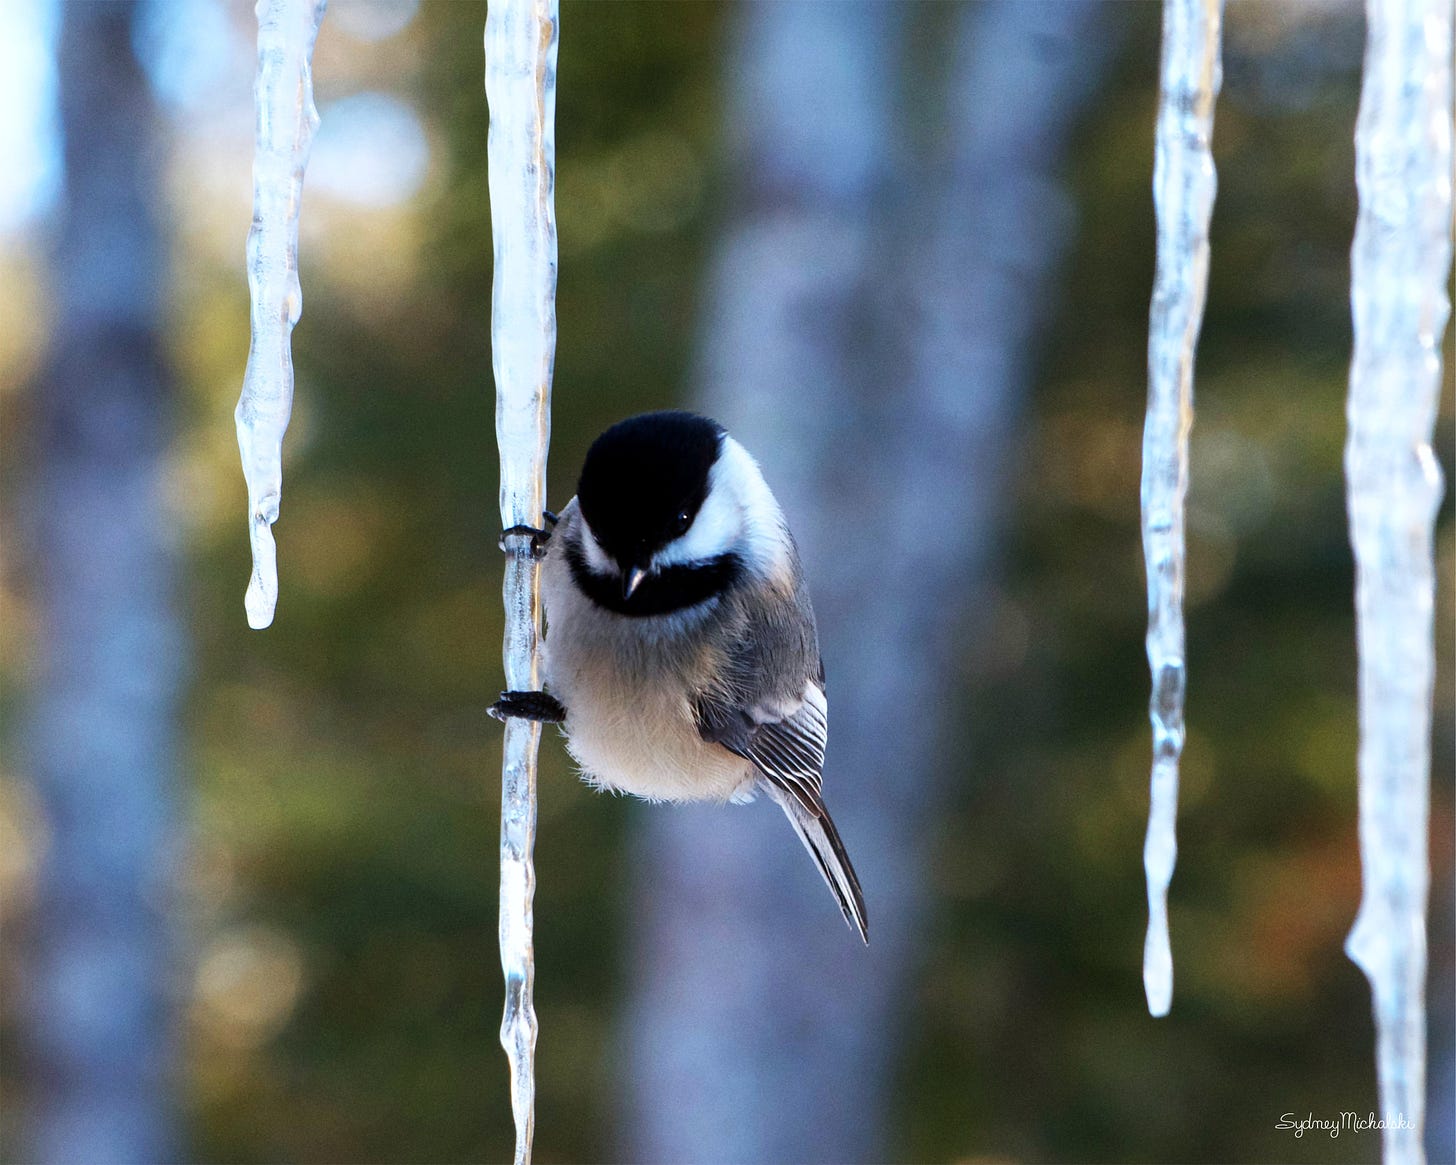 A Black-capped Chickadee perches on an icicle with a forest background.